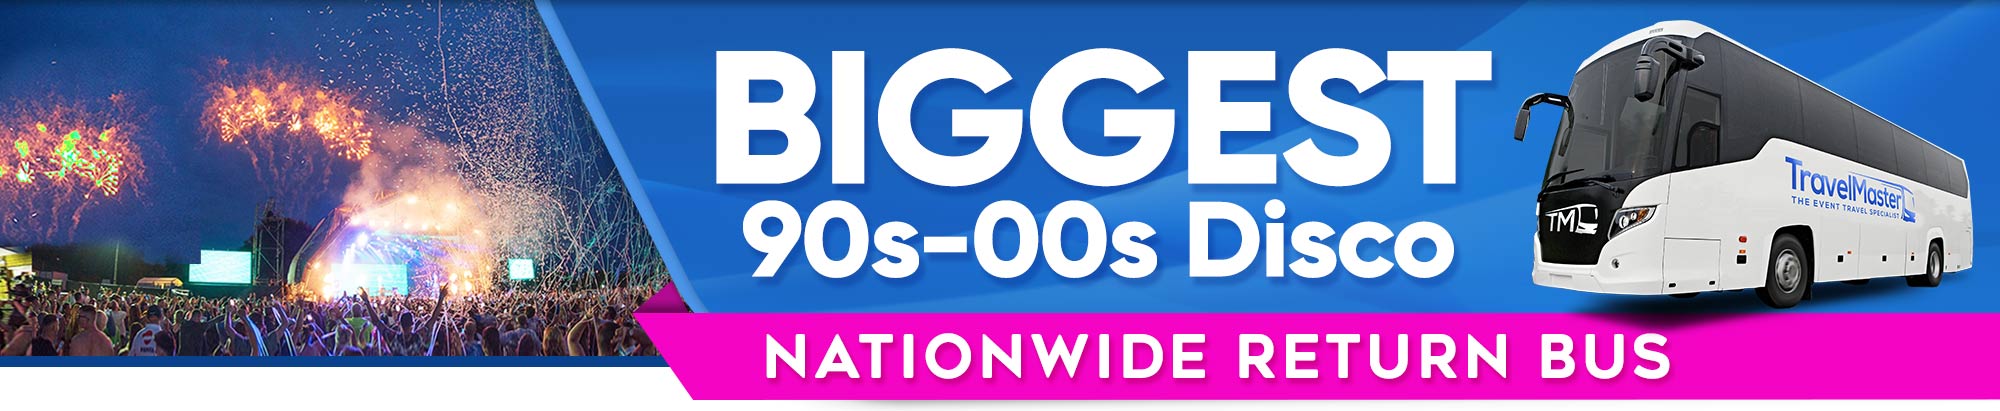 Bus to Biggest 90s-00s Disco | Punchestown Racecourse | 27th June 2020